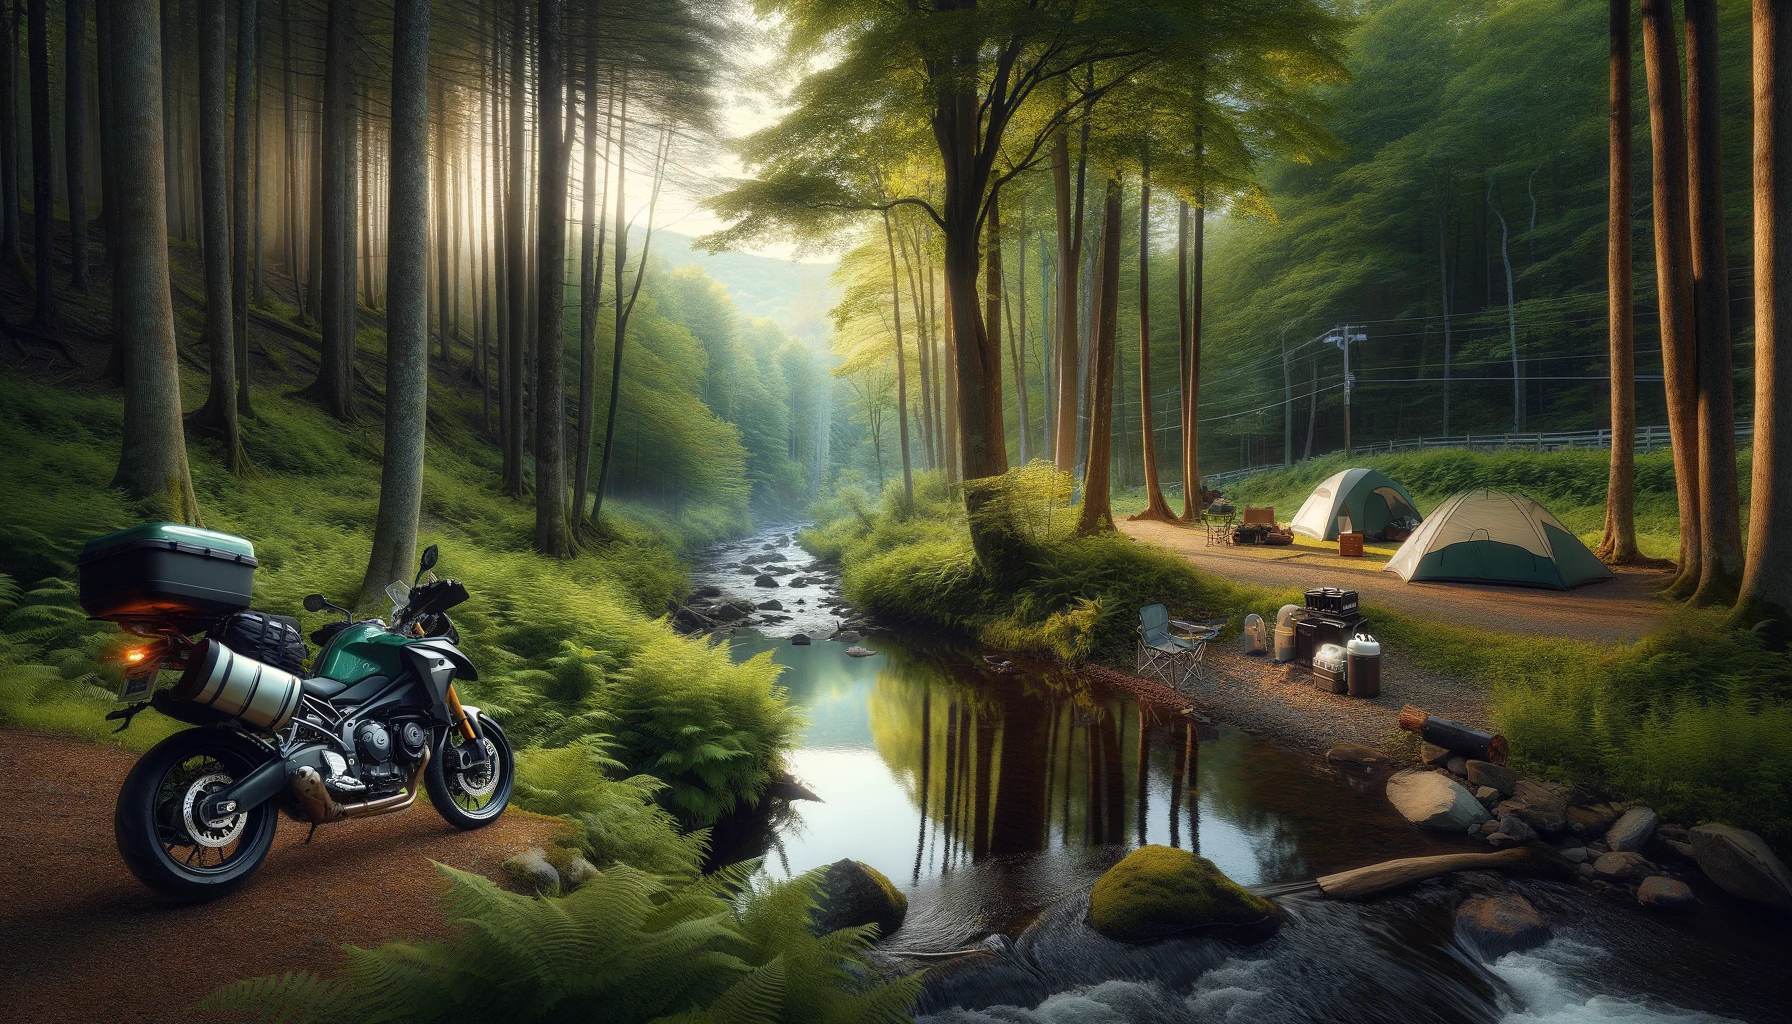 motorcycle-camping-scene-in-Vermont